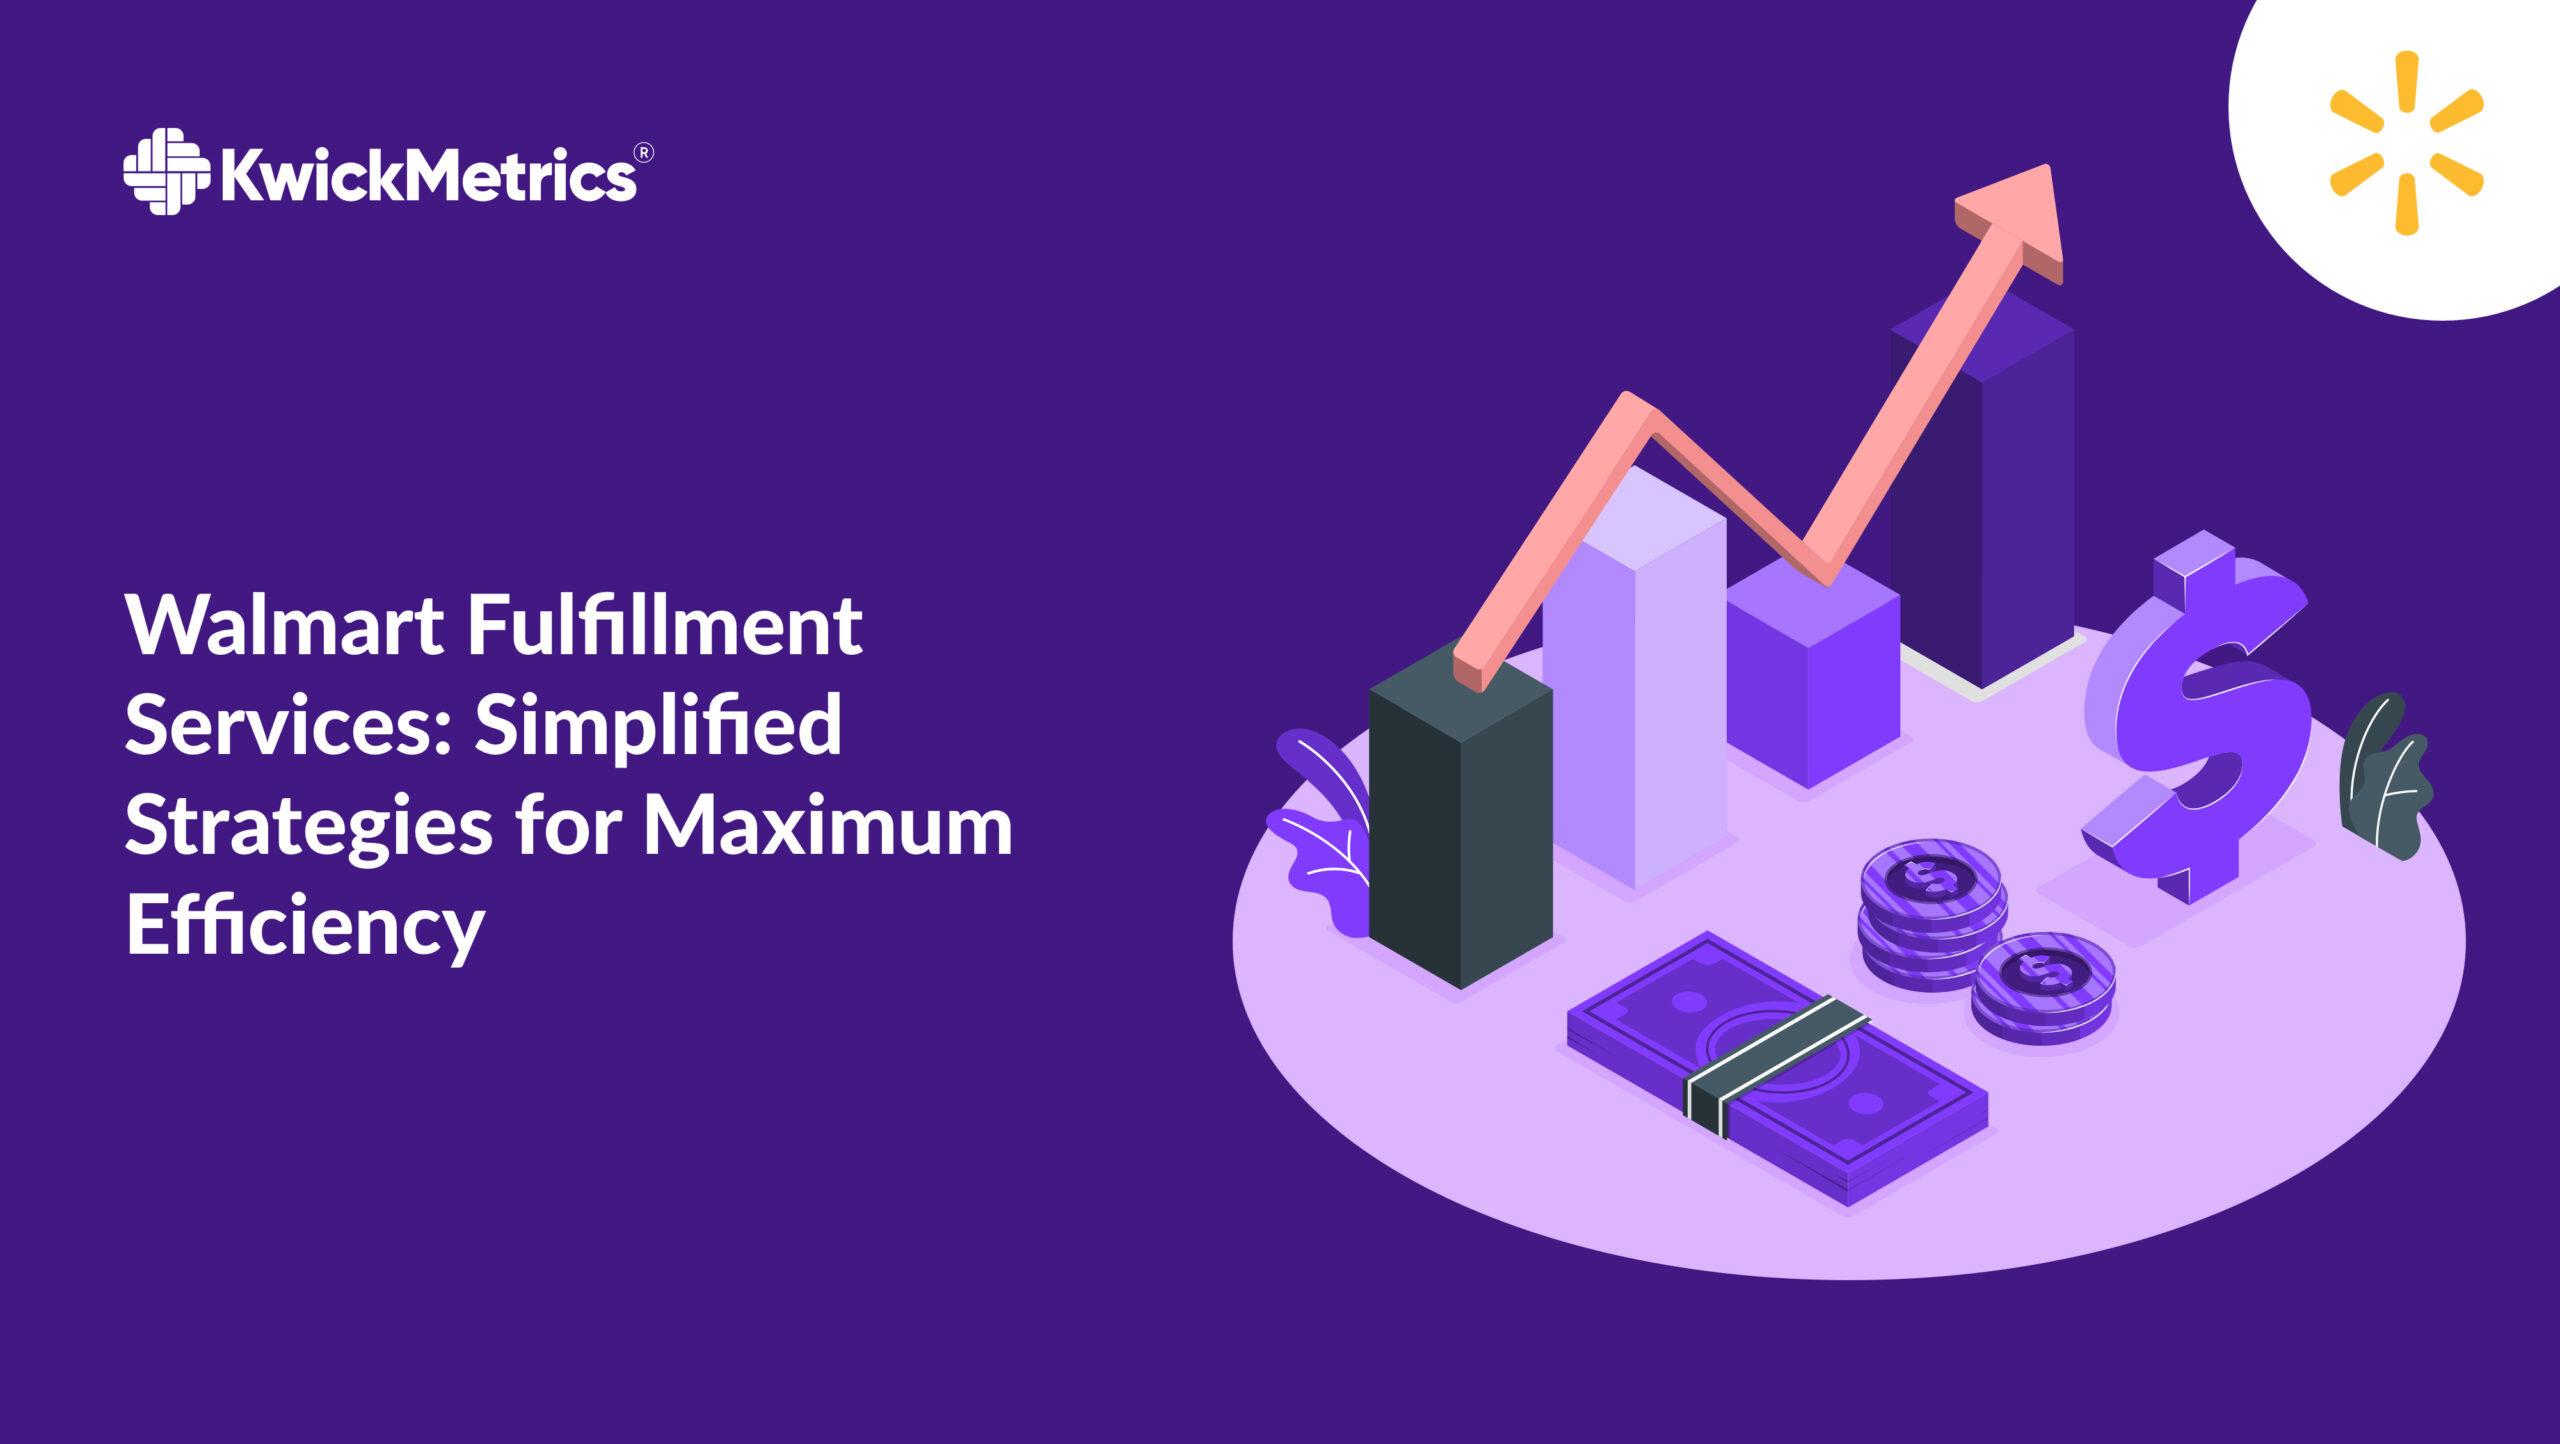 Walmart Fulfillment Services: Simplified Strategies for Maximum Efficiency